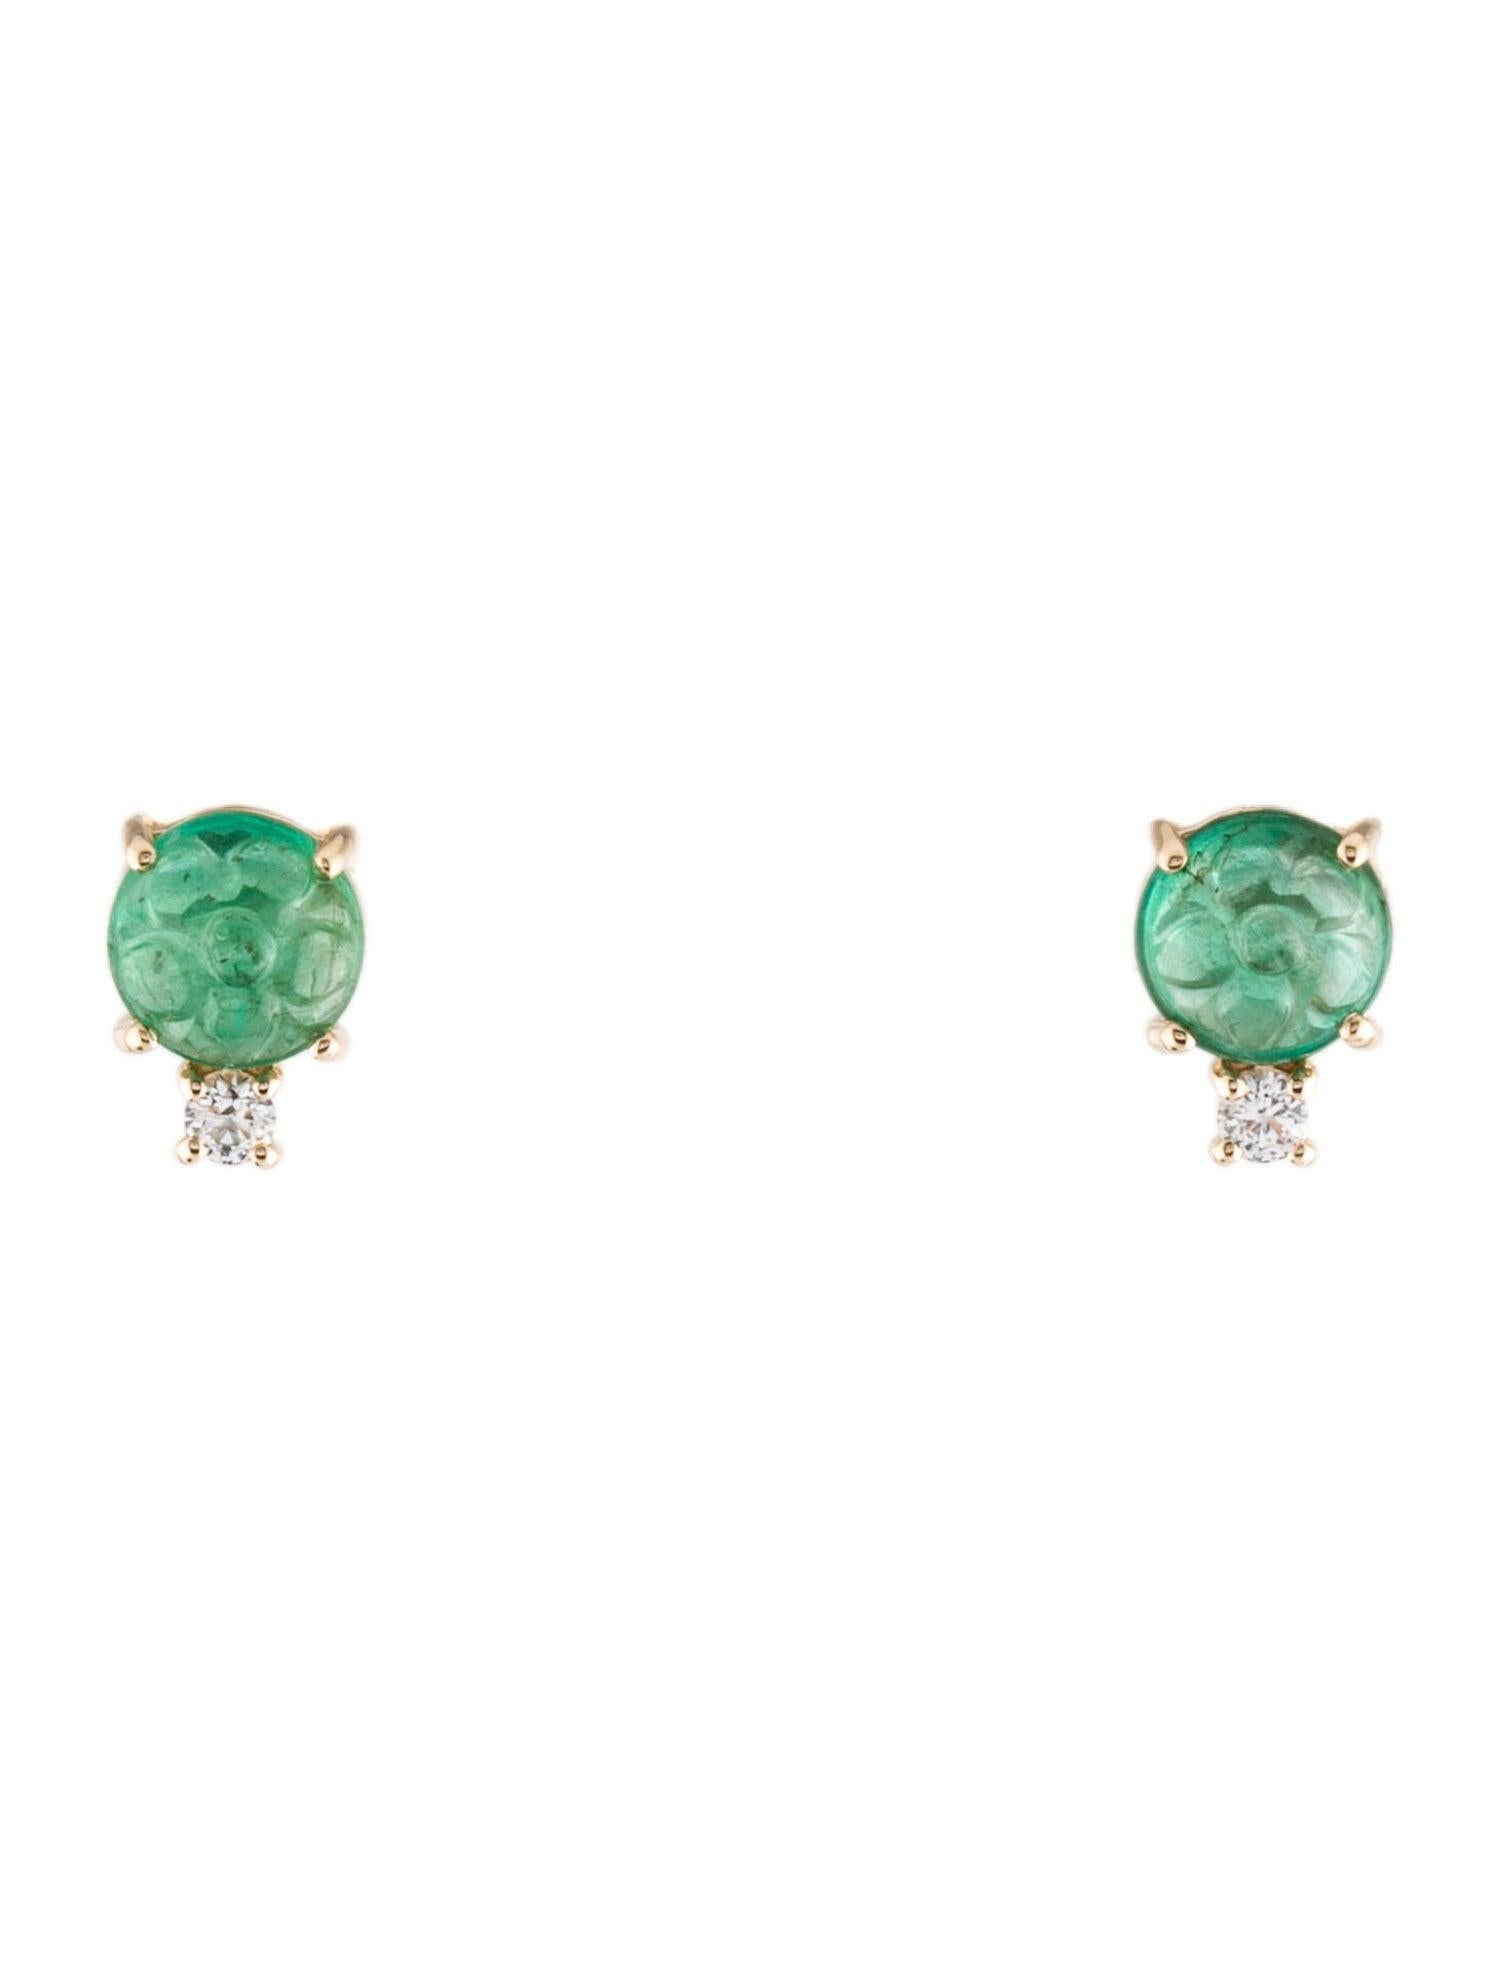 Stunning 14K Emerald & Diamond Stud Earrings - Classic Elegance Jewelry In New Condition For Sale In Holtsville, NY